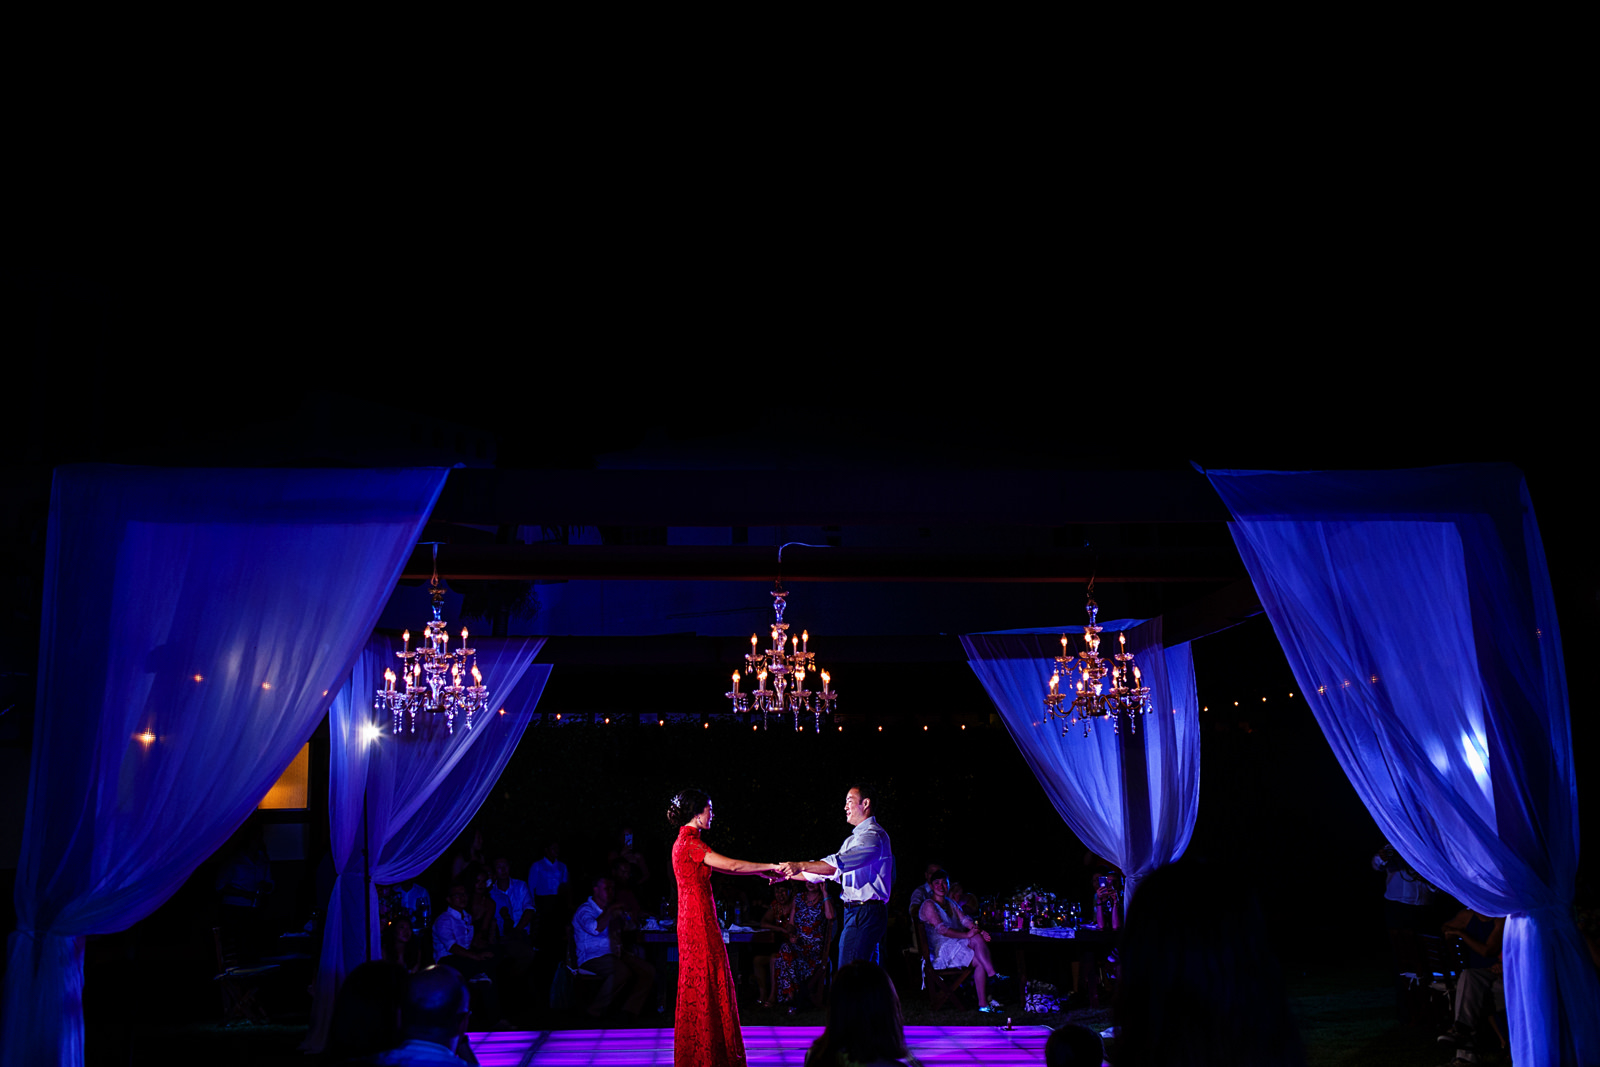 Groom and bride have their first dance as a married couple at the dance floor under a structure with chandeliers.